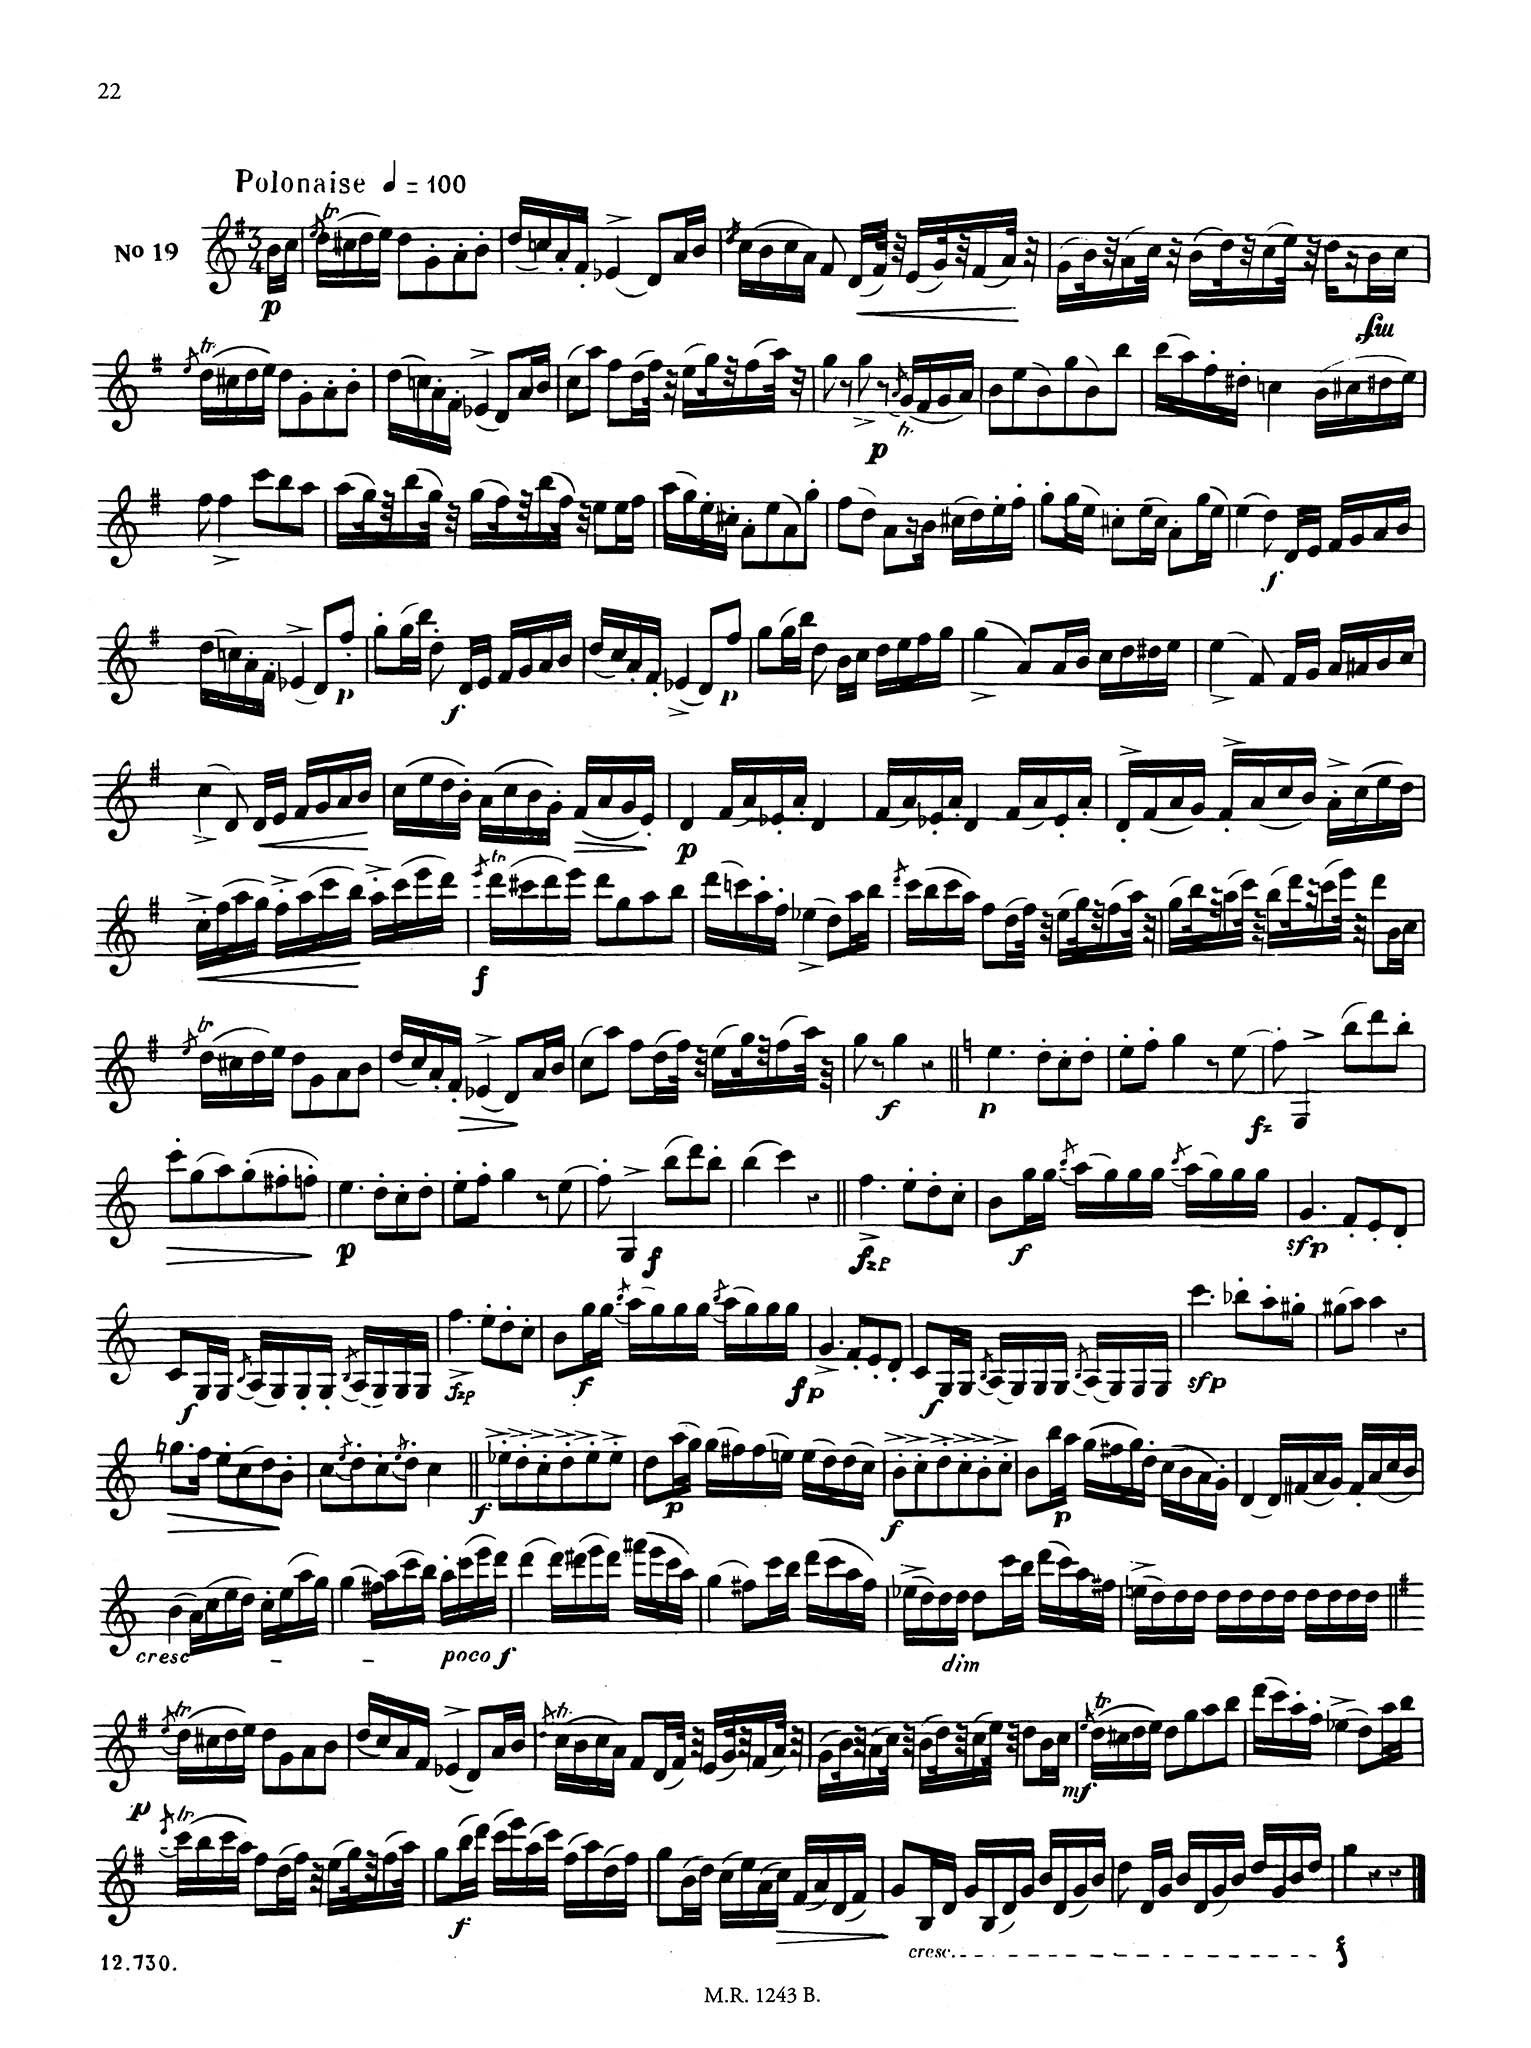 40 Etudes for Clarinet, Book 1 of 2 Page 22